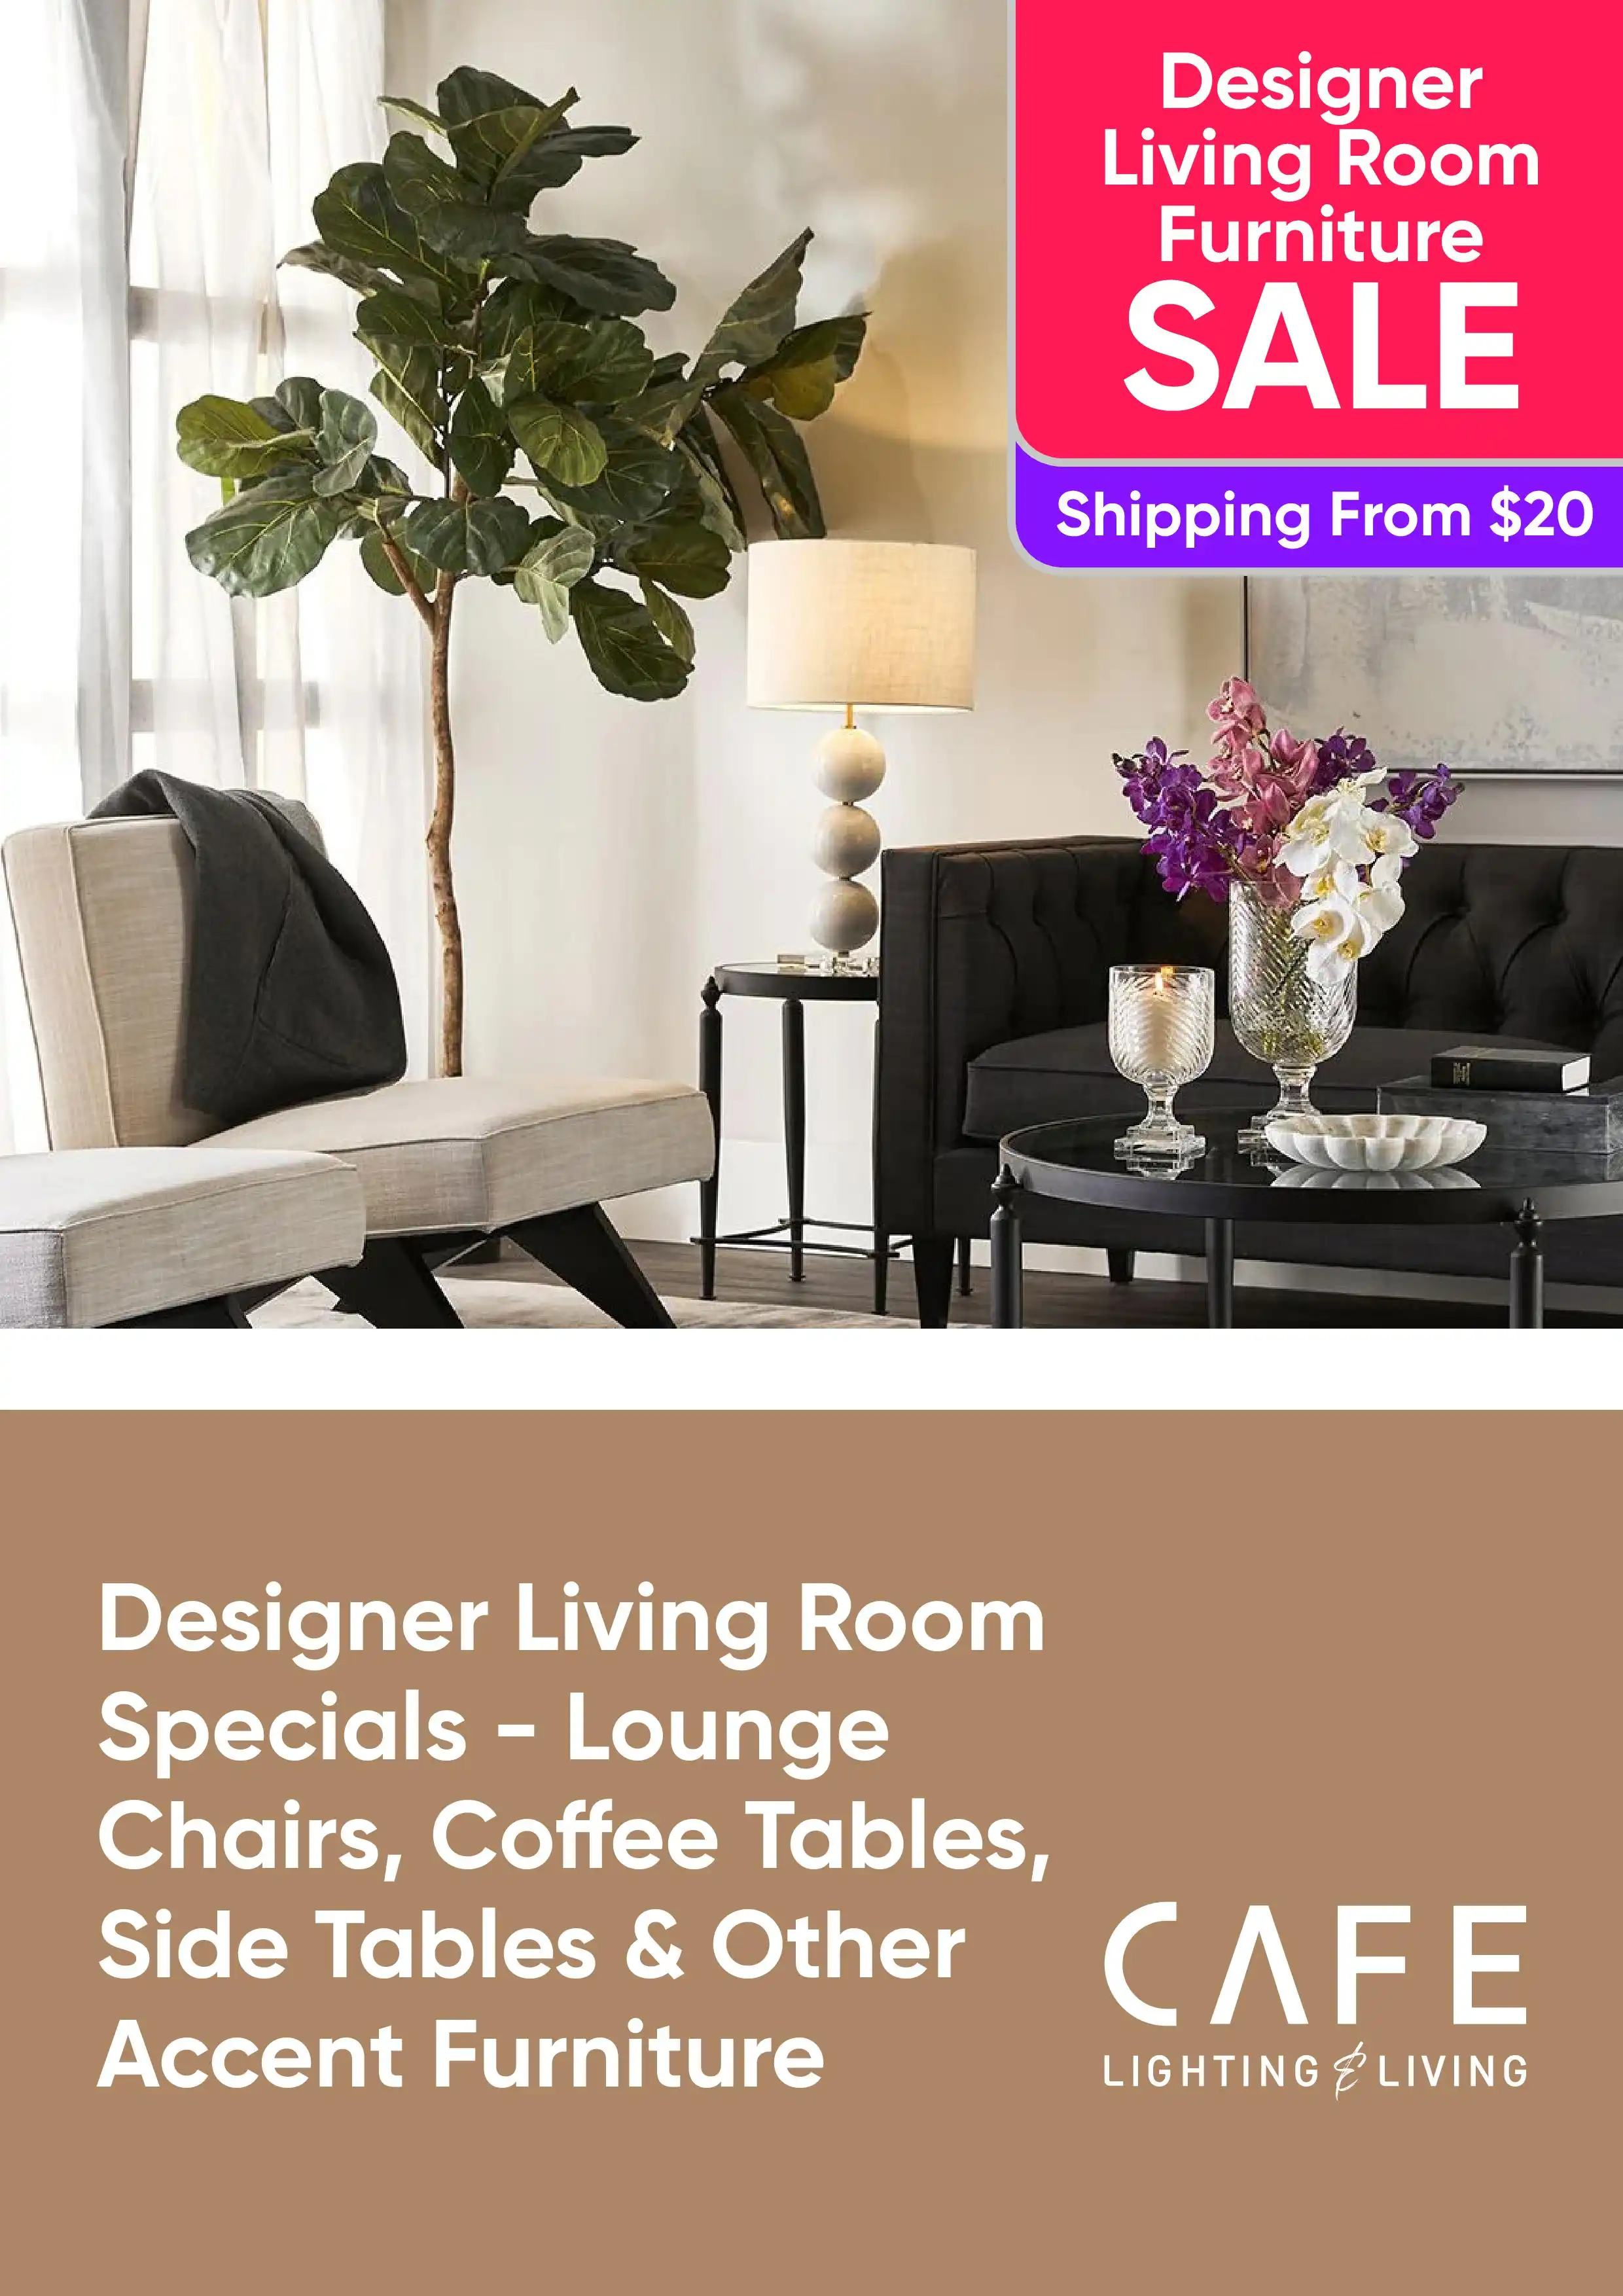 Designer Living Room Specials - Lounge Chairs, Coffee Tables, Side Tables and Other Accent Furniture